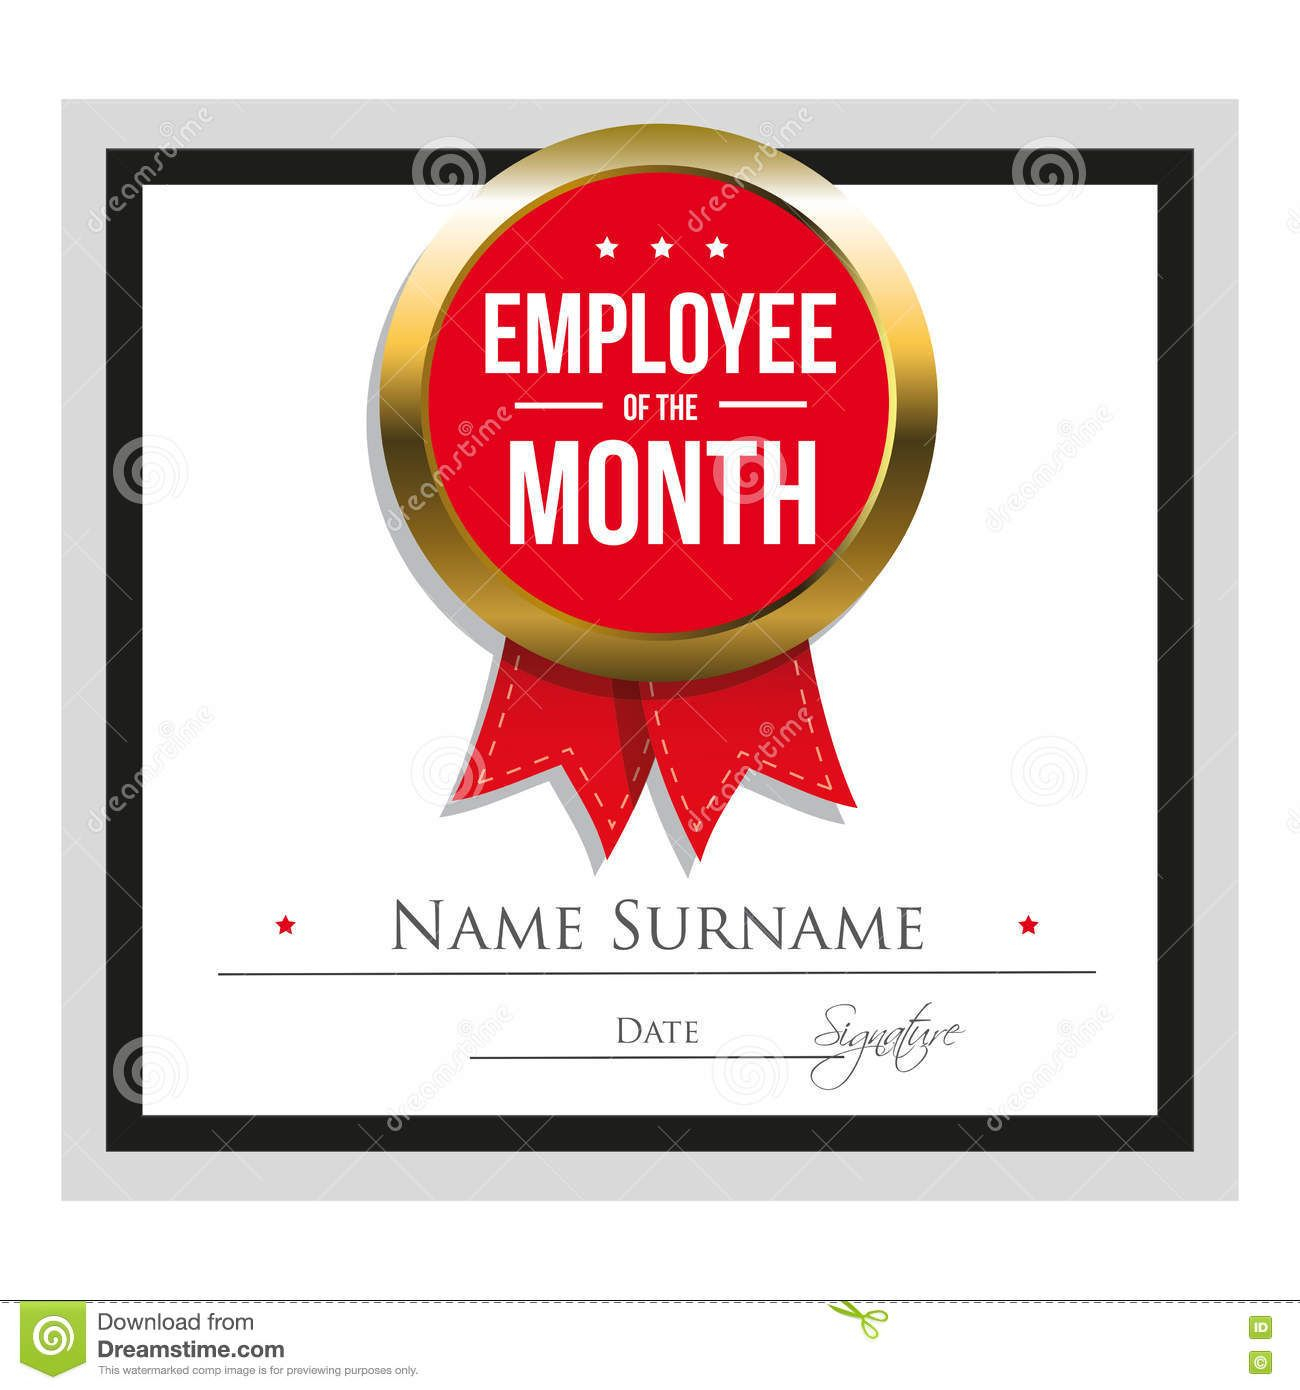 Employee Award Certificate Template Free Templates Design For Manager Of The Month Certificate Template